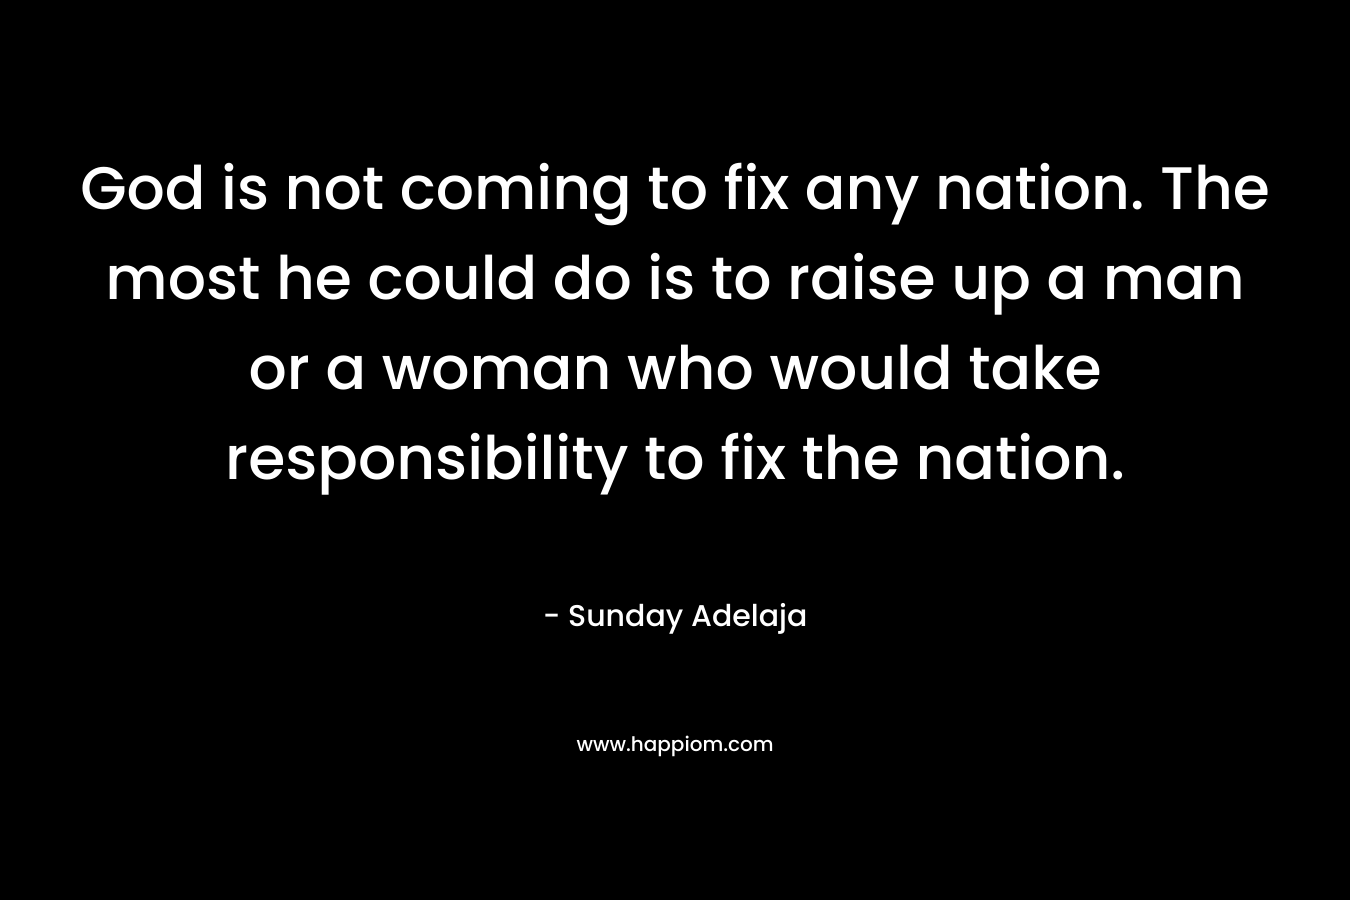 God is not coming to fix any nation. The most he could do is to raise up a man or a woman who would take responsibility to fix the nation.